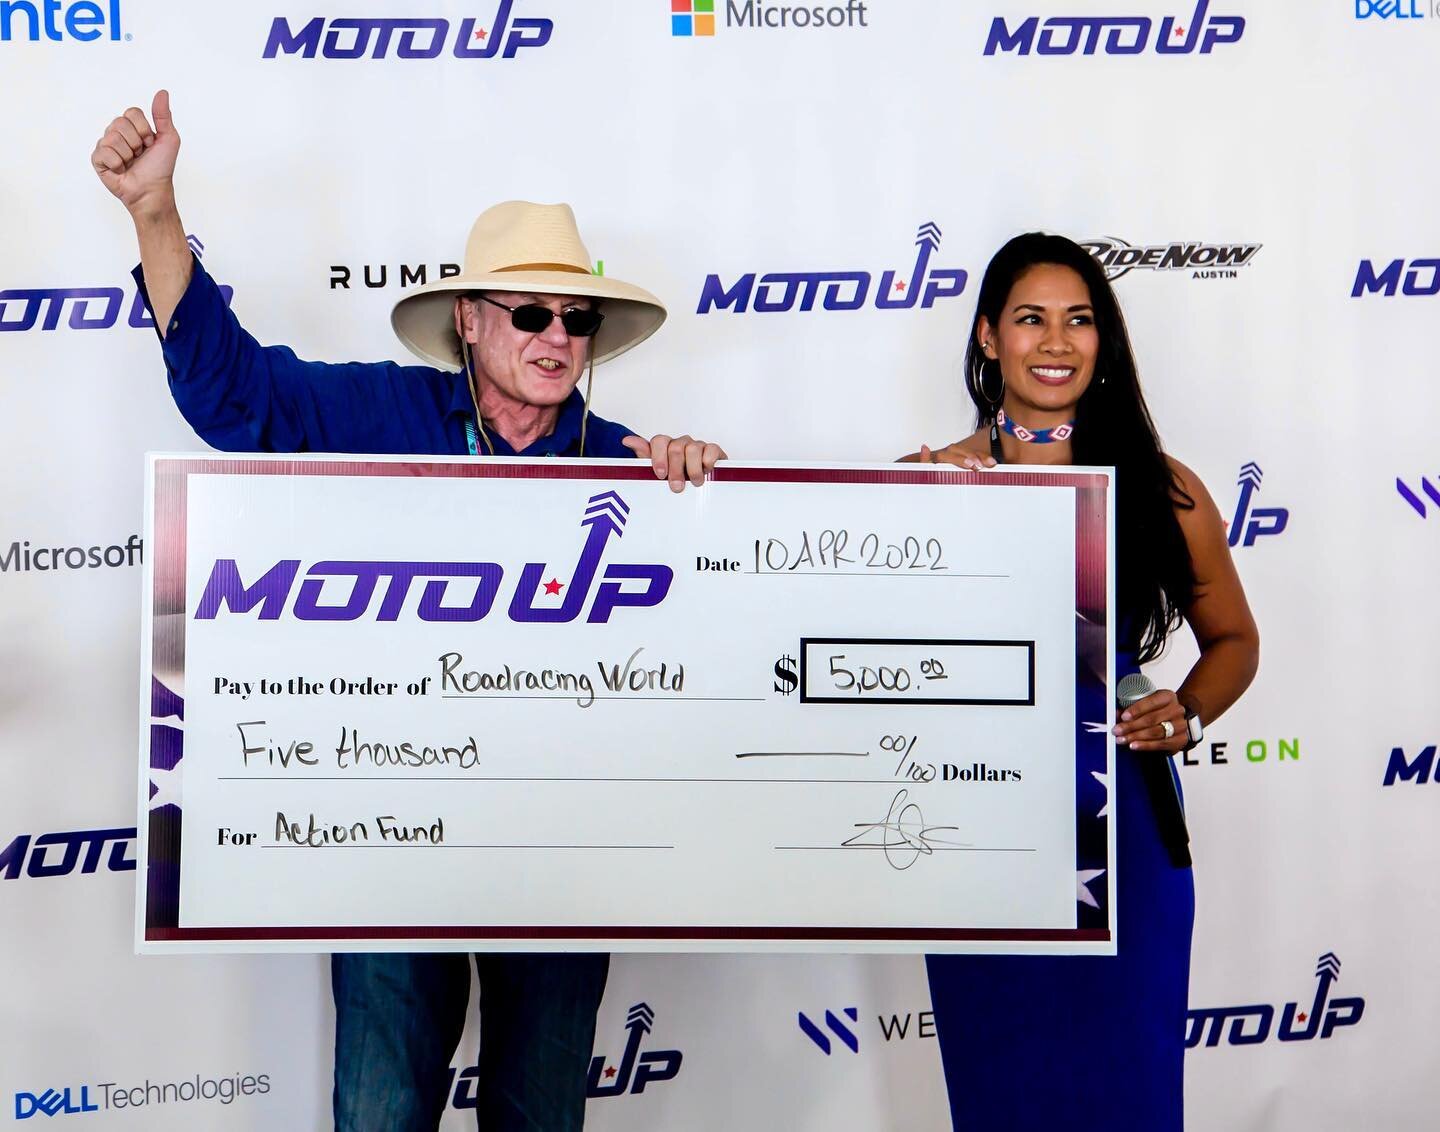 #safetyfirst 🚨 
The @roadracing_world Action Fund is all about keeping riders safe with the deployment of soft air barriers around tracks across the US. MotoUP was able to donate $5K to their cause through our MotoGP VIP event. Thank you John Ulrich